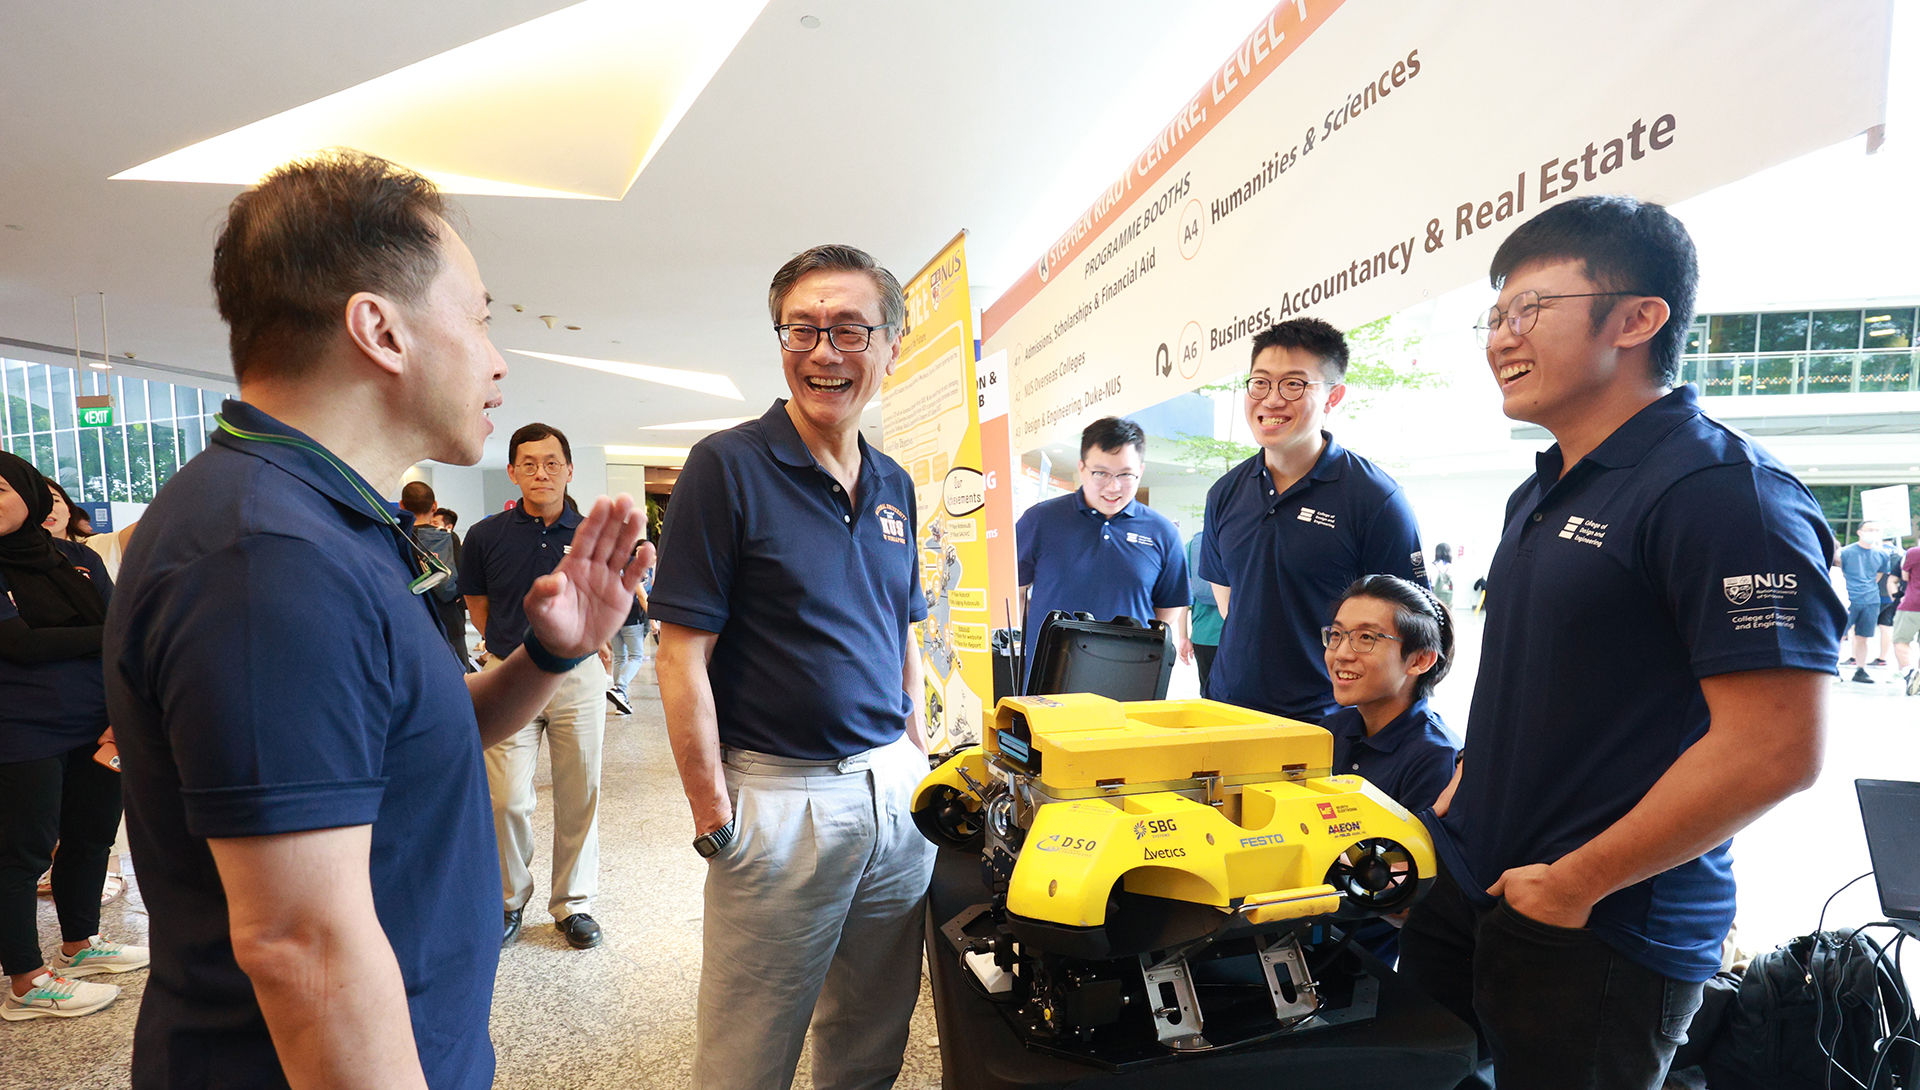 Professor Aaron Thean, Dean of the NUS College of Design and Engineering (left) and NUS President Professor Tan Eng Chye (second from left) speaking to members of Team Bumblebee, comprising students from the Mechanical, Electrical, Computer Engineering and the School of Computing disciplines. They are pictured with their award-winning Bumblebee AUV 4.0 robotic submarine.